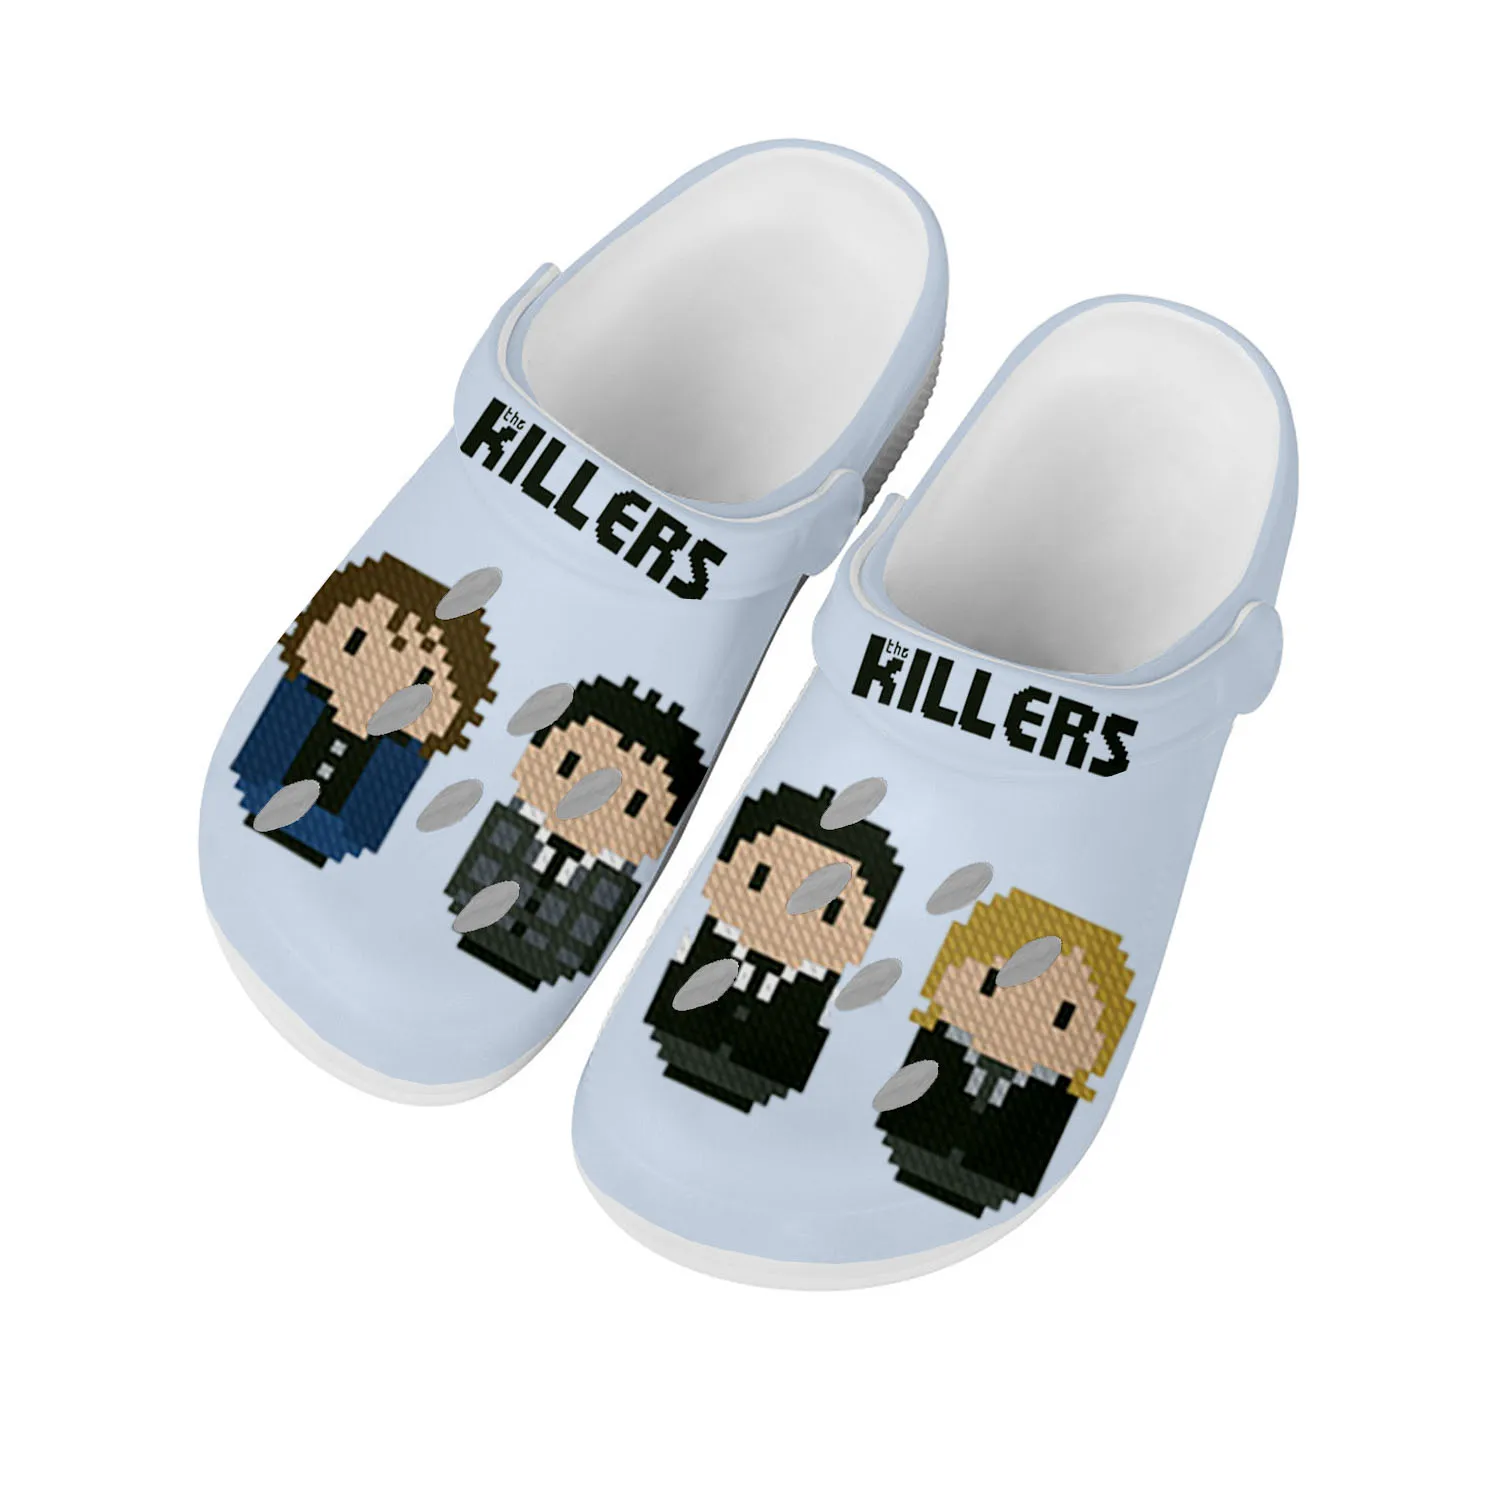 

The Killers Rock Band Home Clogs Custom Water Shoes Mens Womens Teenager Shoe Garden Clog Breathable Beach Hole Slippers White